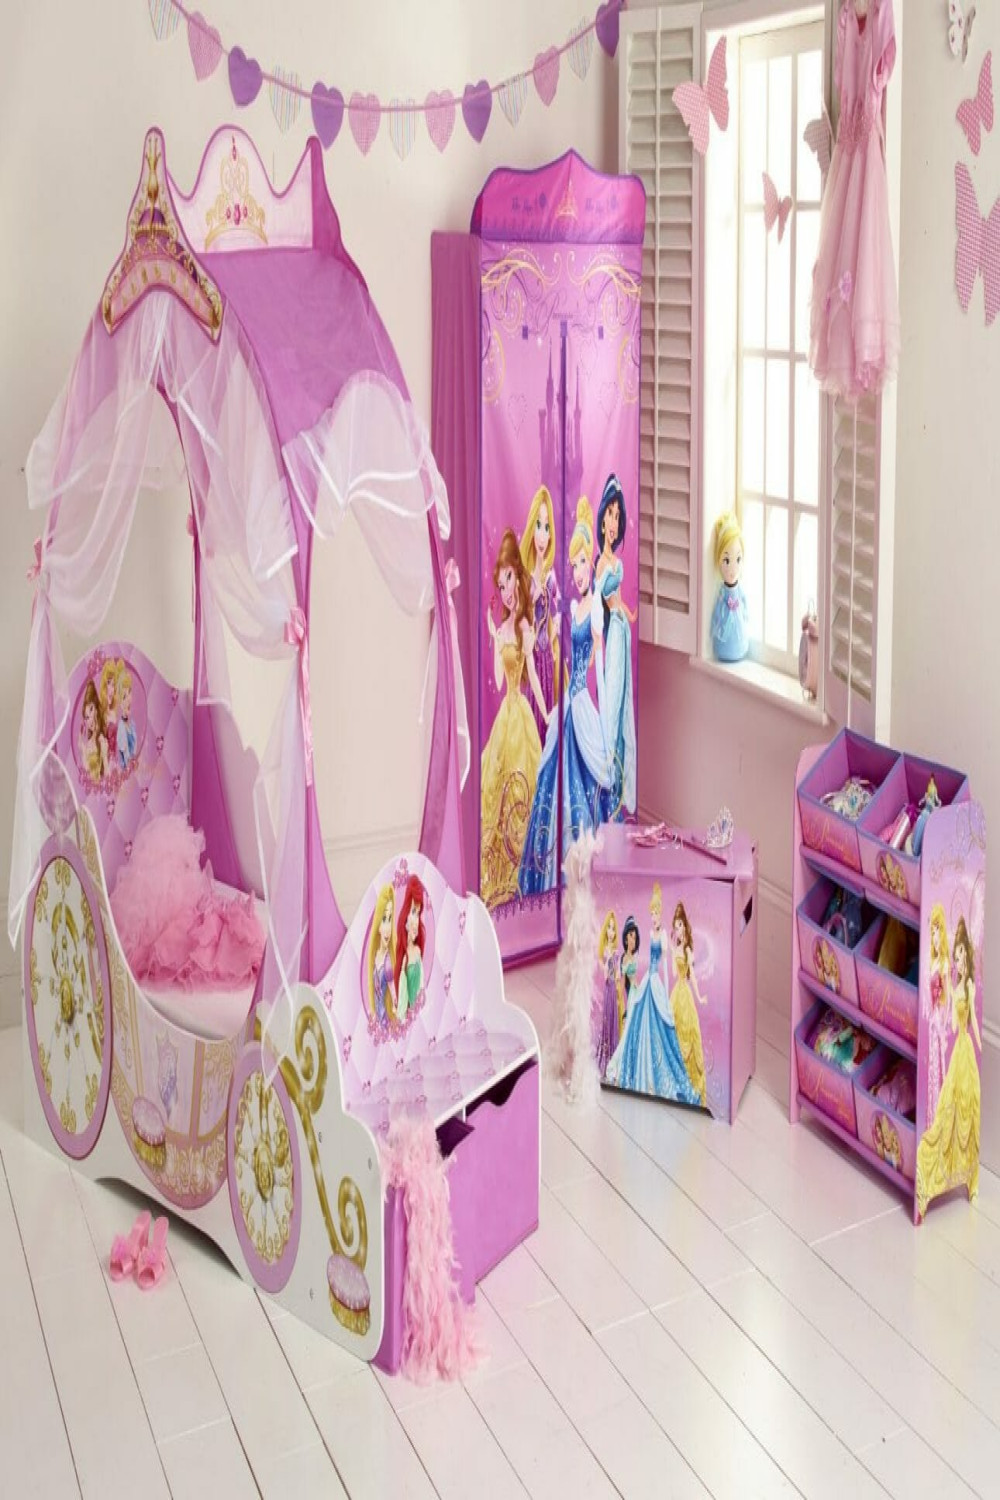 Incredibly Captivating Princess Bedroom Ideas to Steal